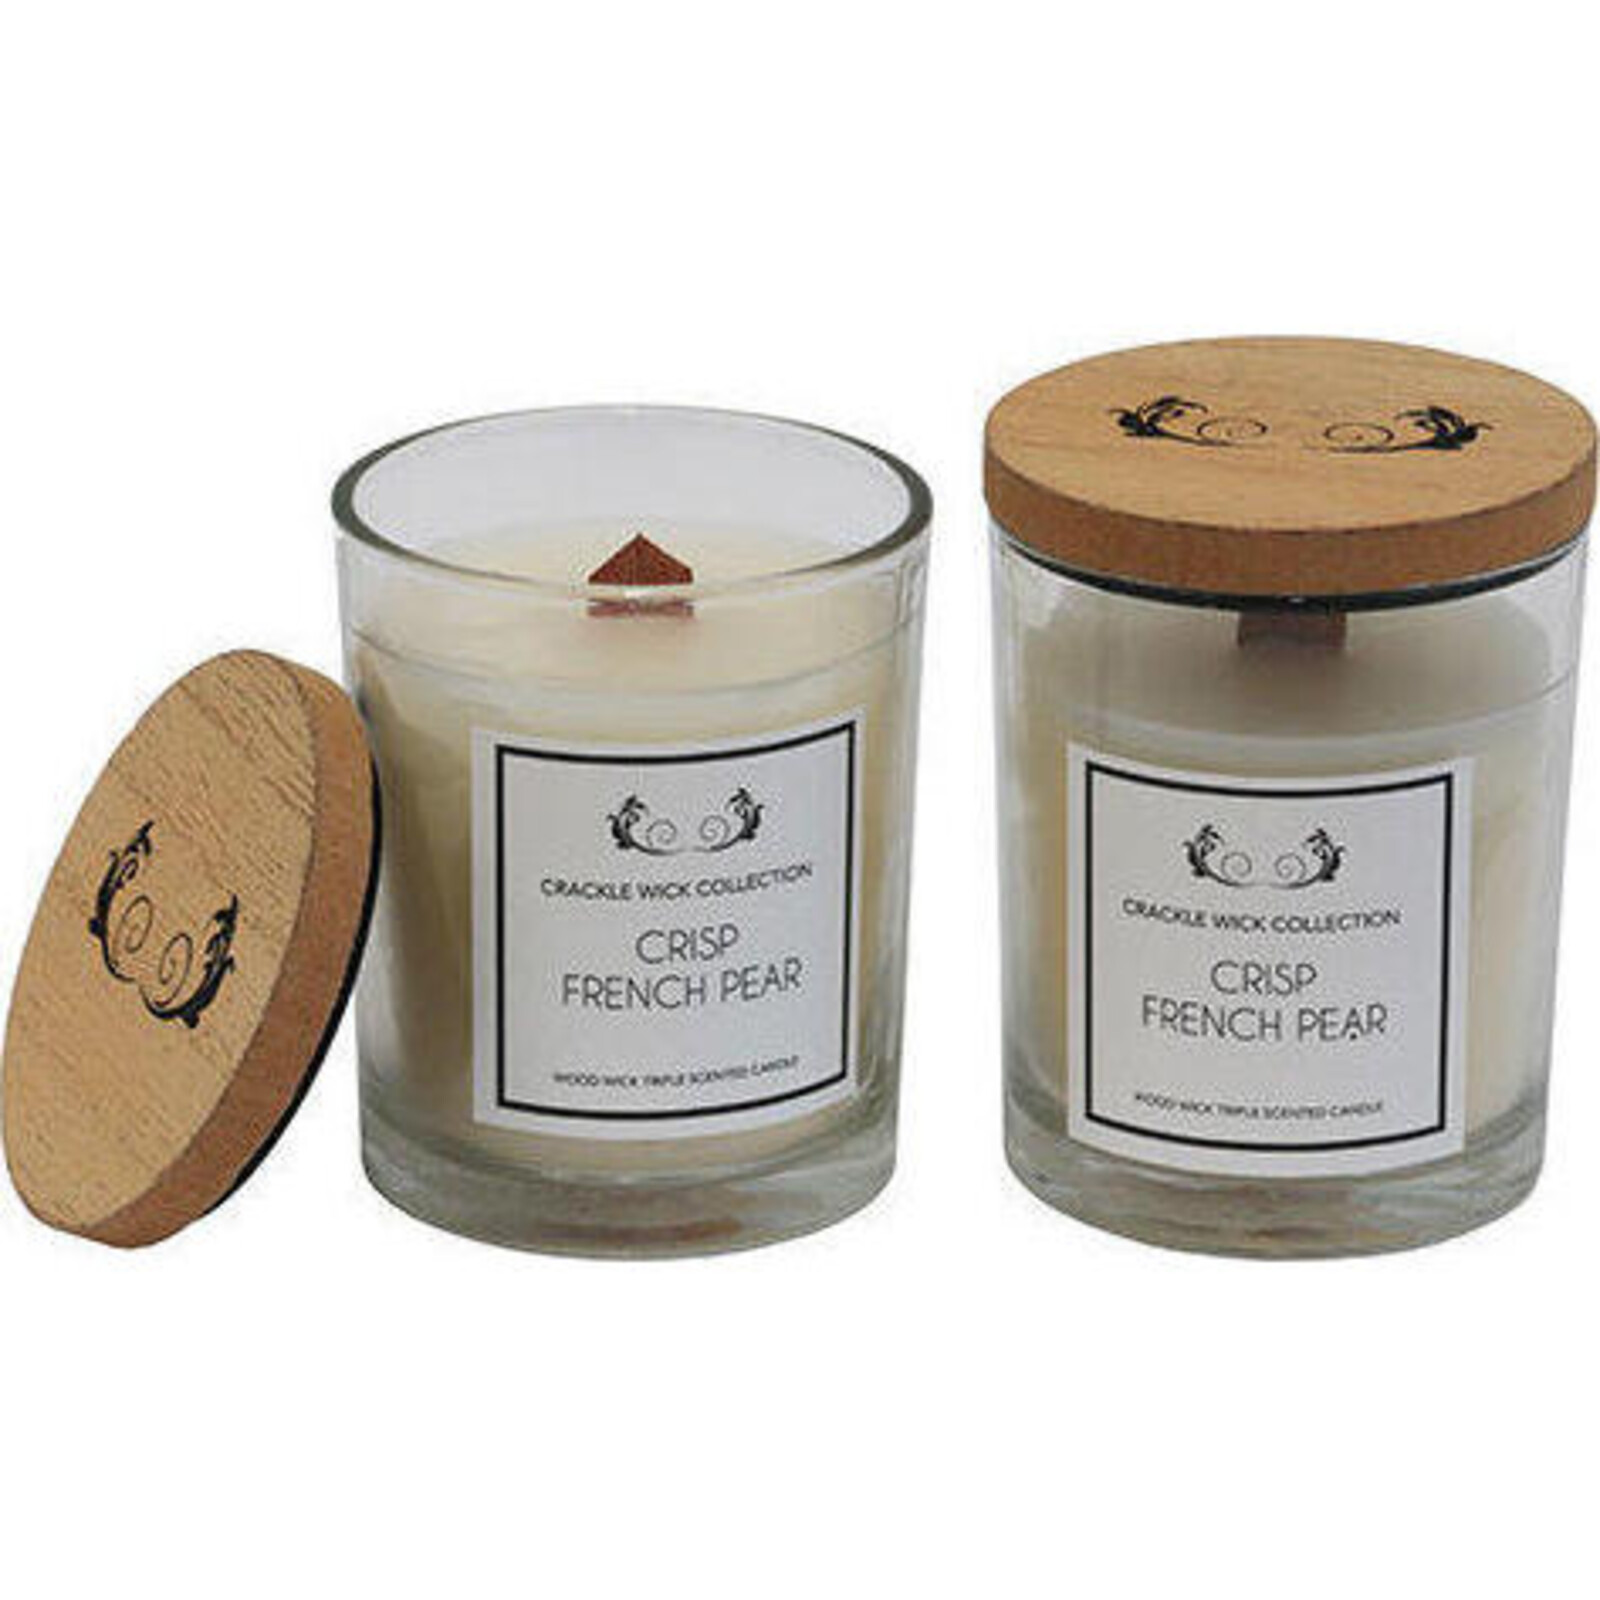  Candle Crackle Wick Crisp French Pear